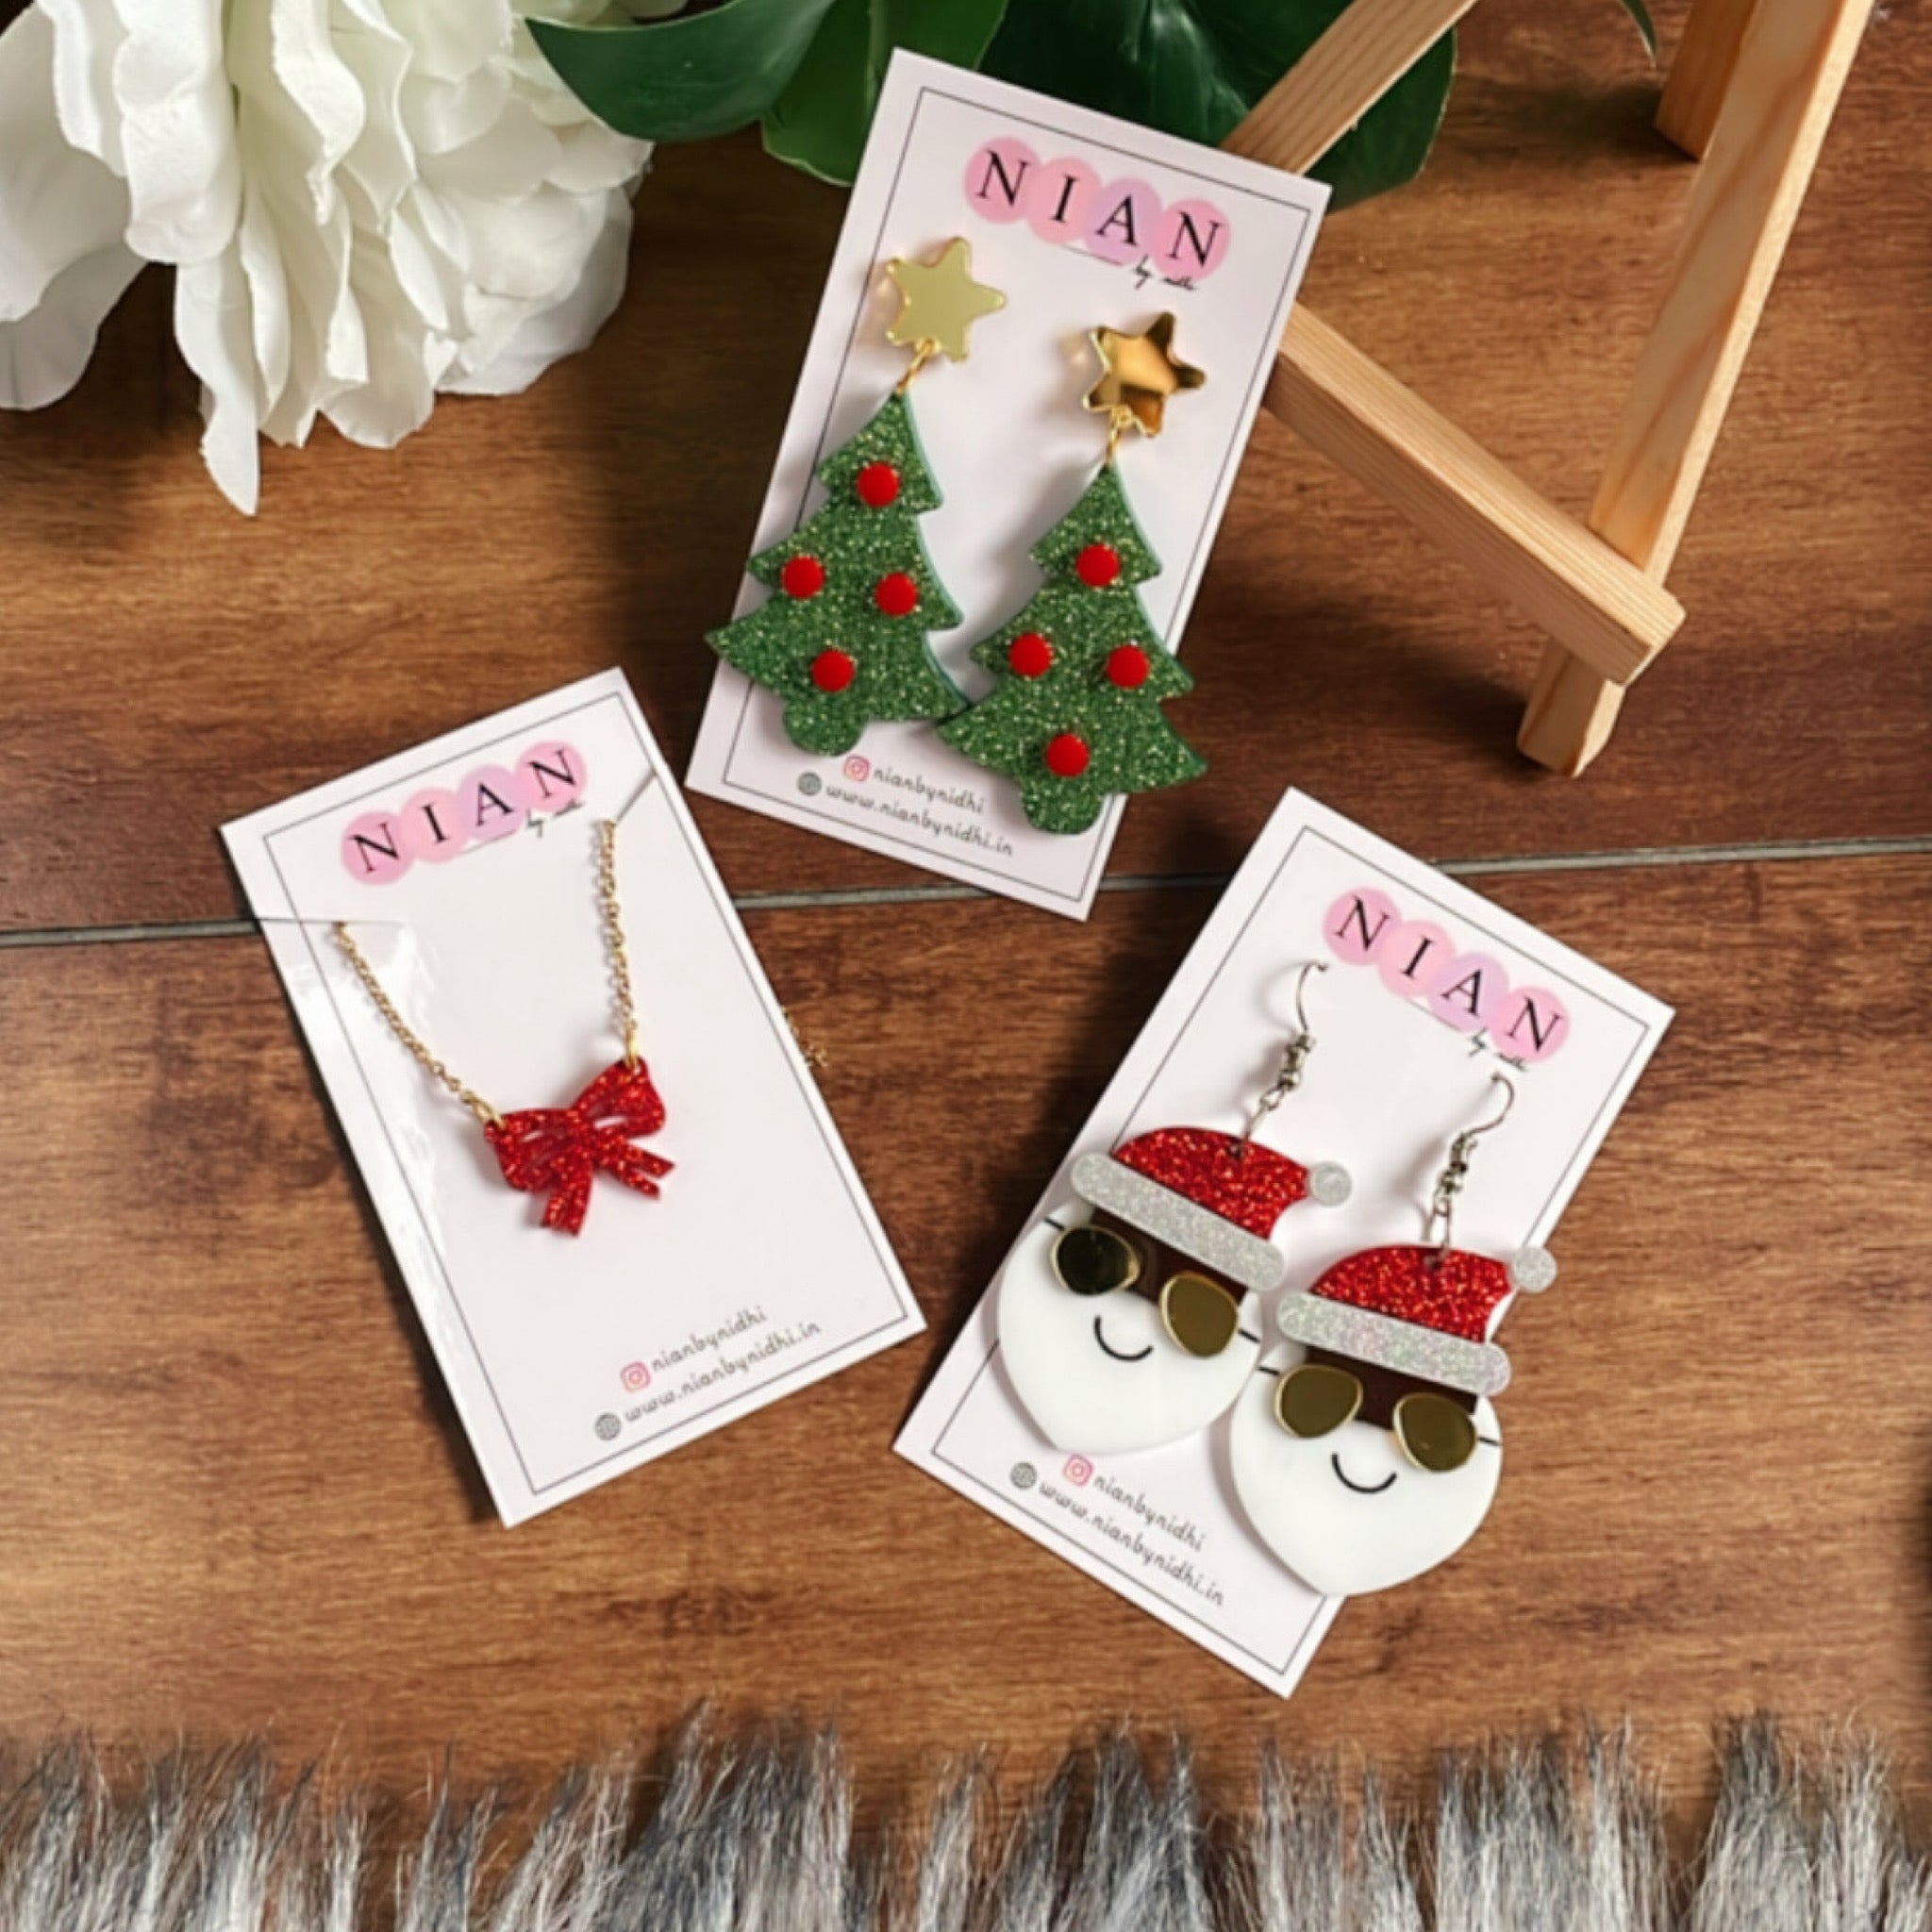 The Jingle Edition - consists 3 products - Yo Santa Earrings, Xmas Tree Earrings, and Bow Necklace - Nian by Nidhi - placed in a brown background along with Nian by Nidhi earring cards - Shimmer Green, Red, White, Shimmer Red